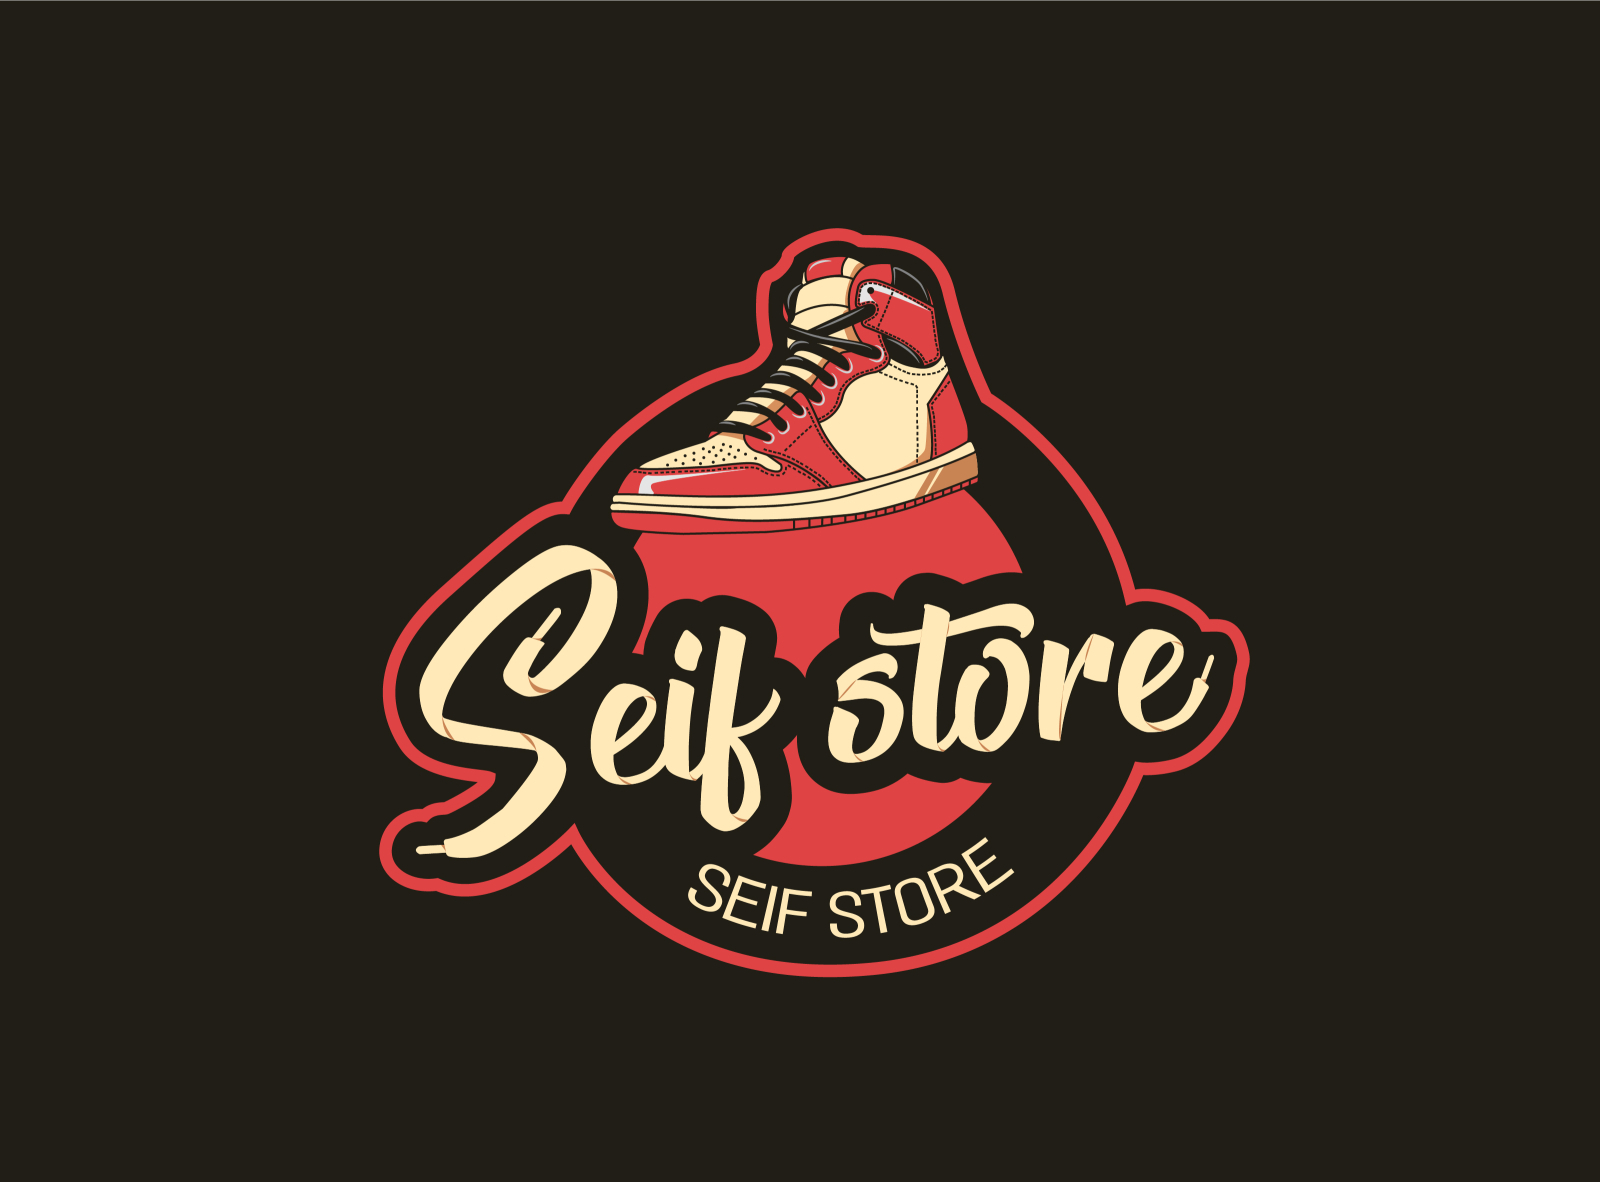 Logo design for a shoe store by Mohamed Usama on Dribbble